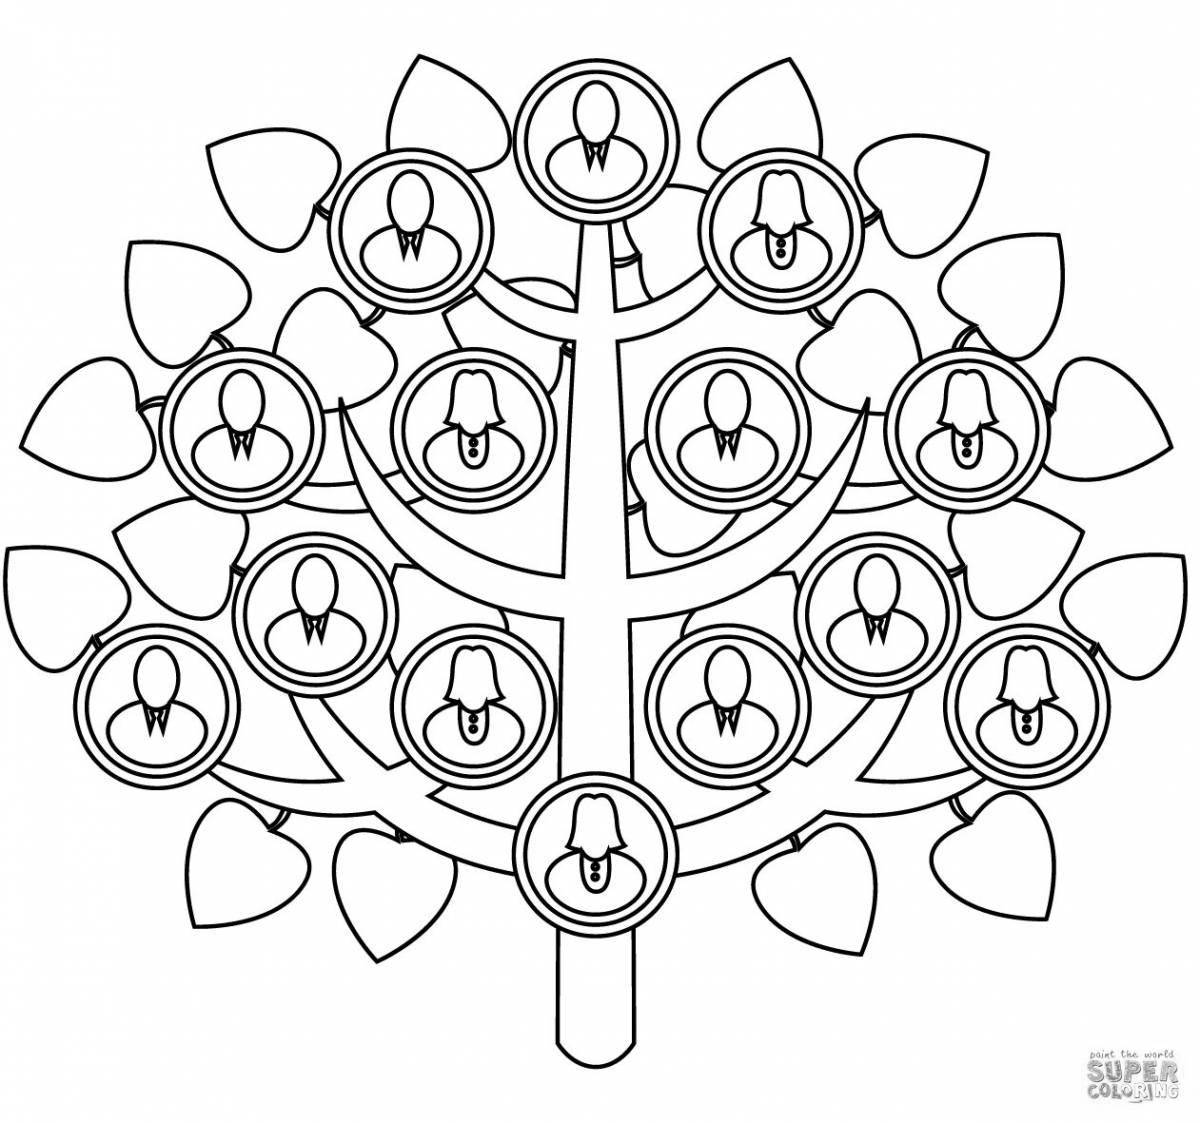 Exotic family tree coloring page